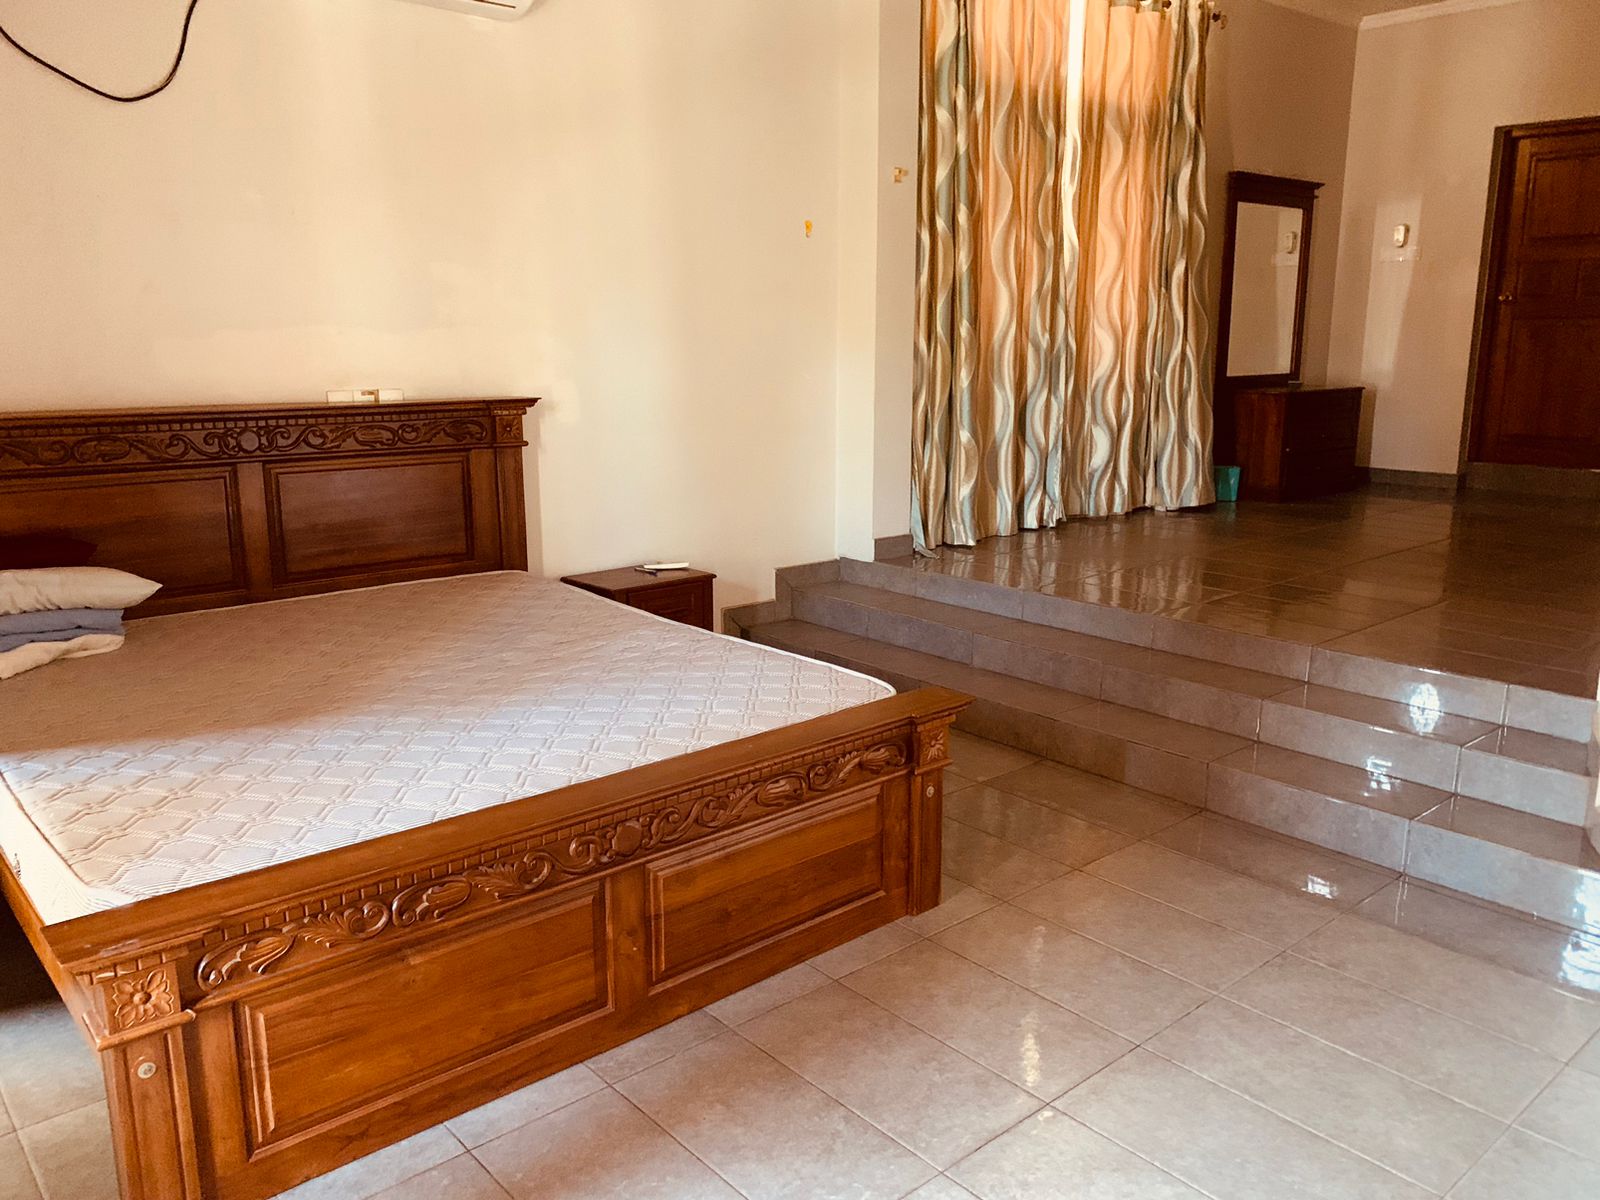 Luxury House For Rent In Park Road Colombo 05 - 5 Bedrooms - 1,500,000 per Month